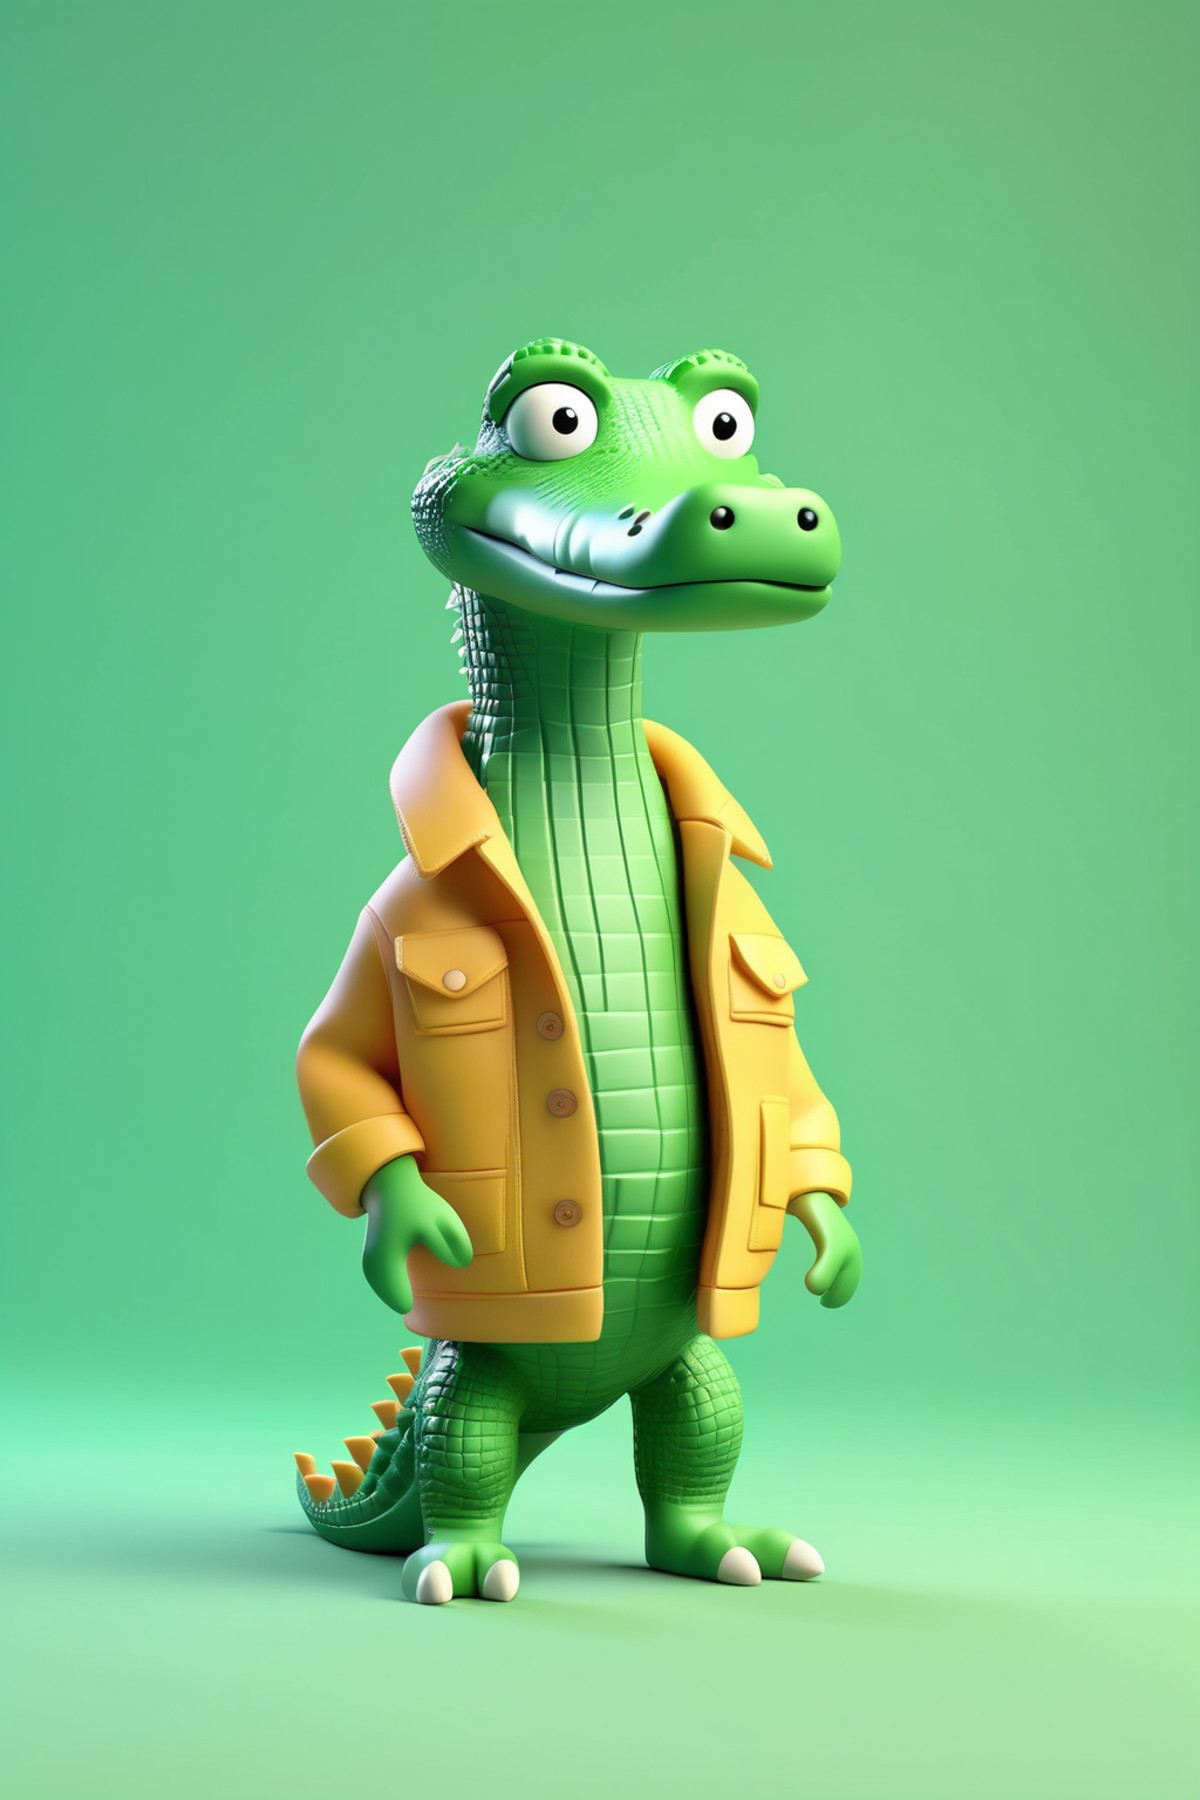 <lora:Dressed animals:1>Dressed animals - a crocodile in a cool brand new clothing, minimalistic 3d cartoon style